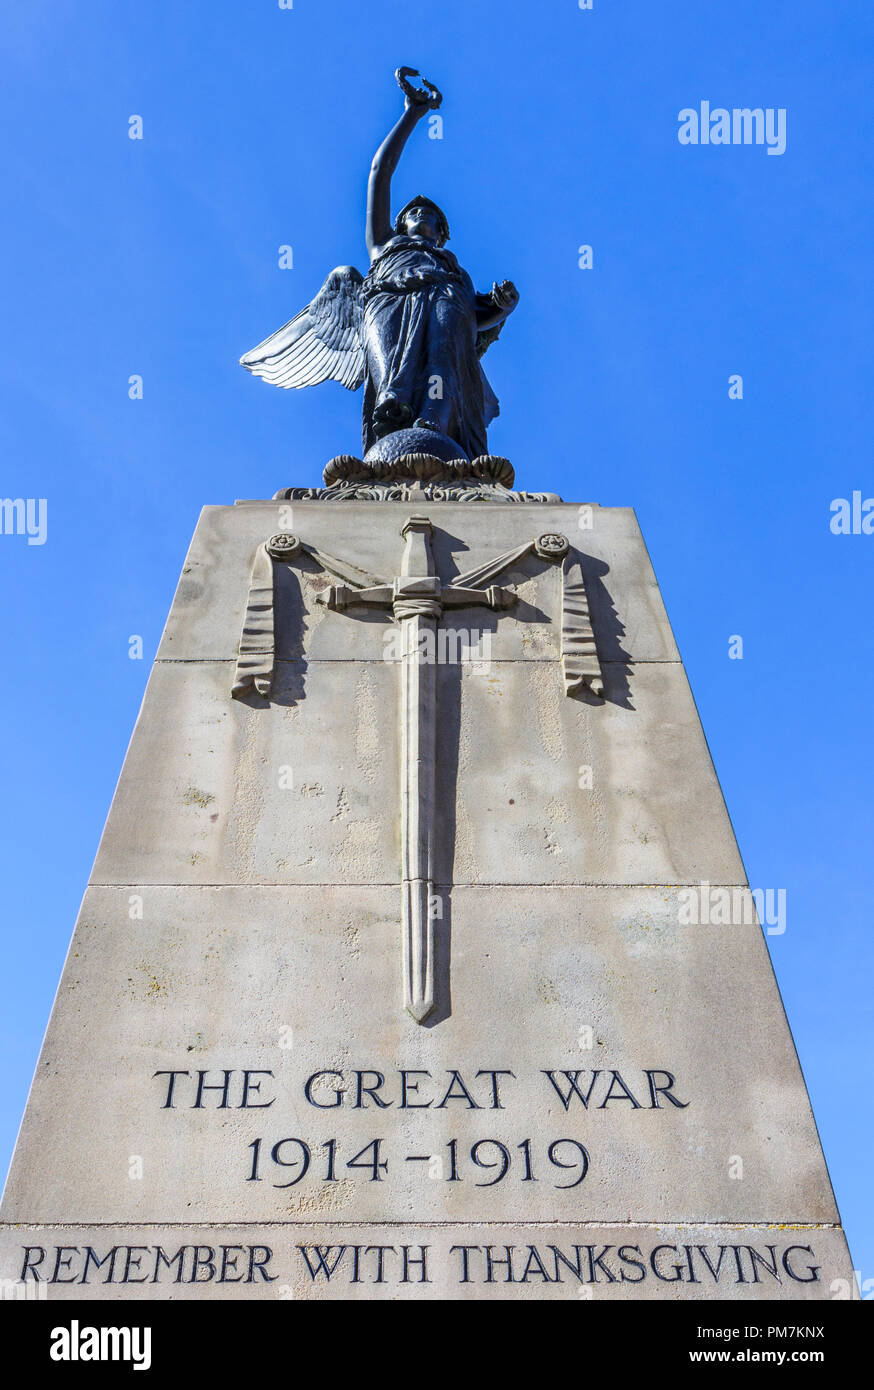 Jubilee Square war memorial with winged Victory statue, town centre of Woking, Surrey, southeast England, UK, inscribed 'The Great War, 1914 - 1919' Stock Photo